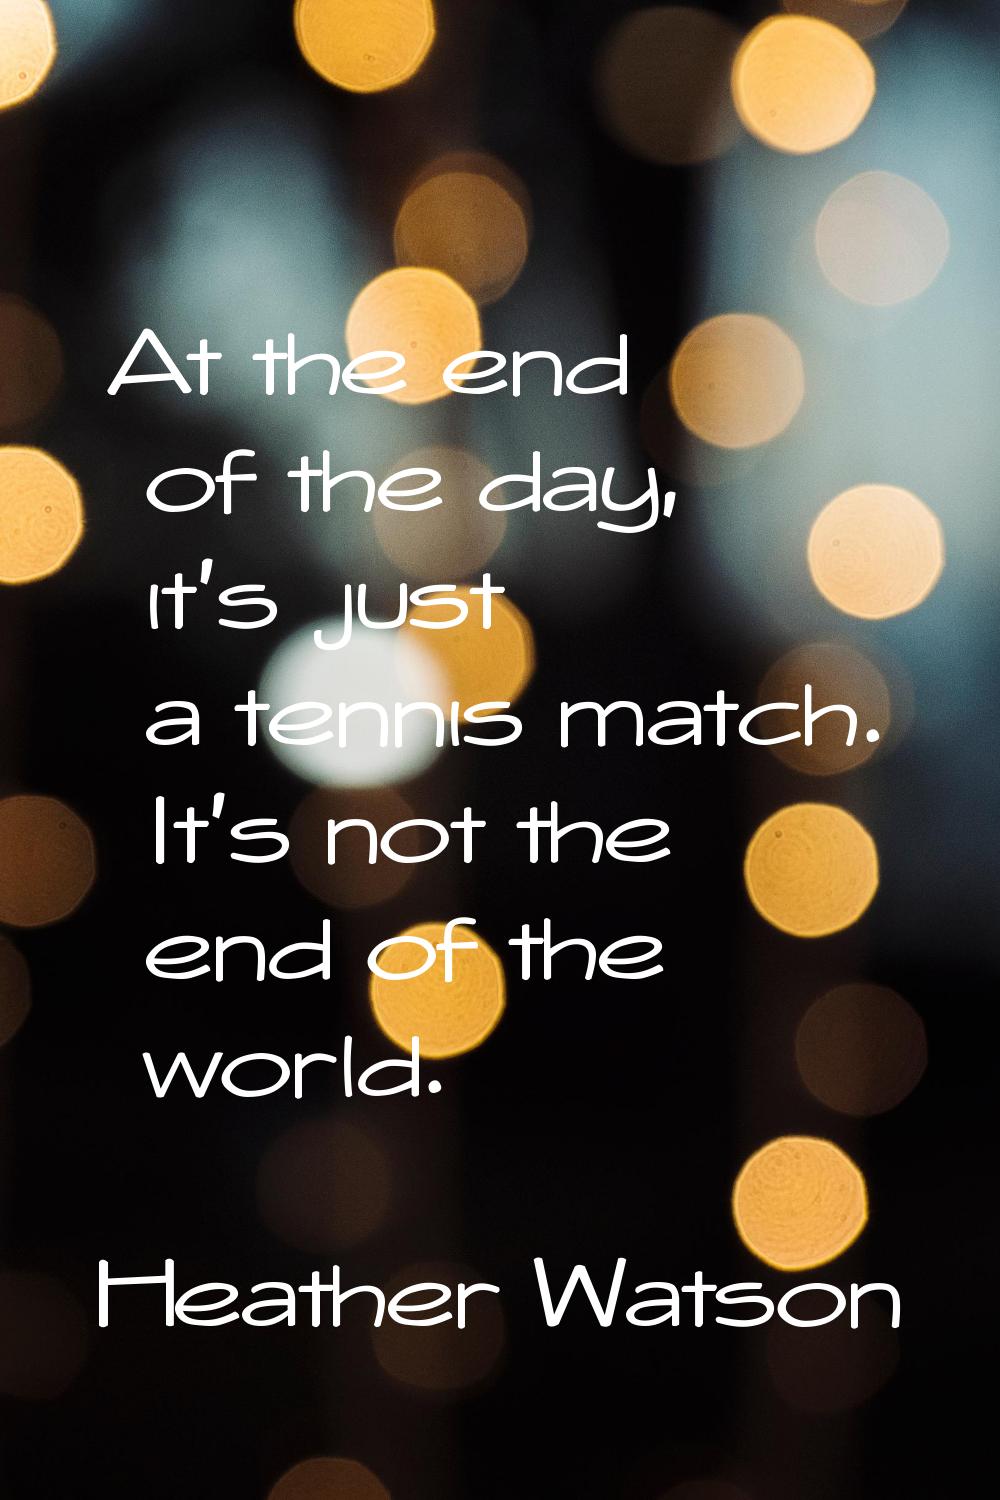 At the end of the day, it's just a tennis match. It's not the end of the world.